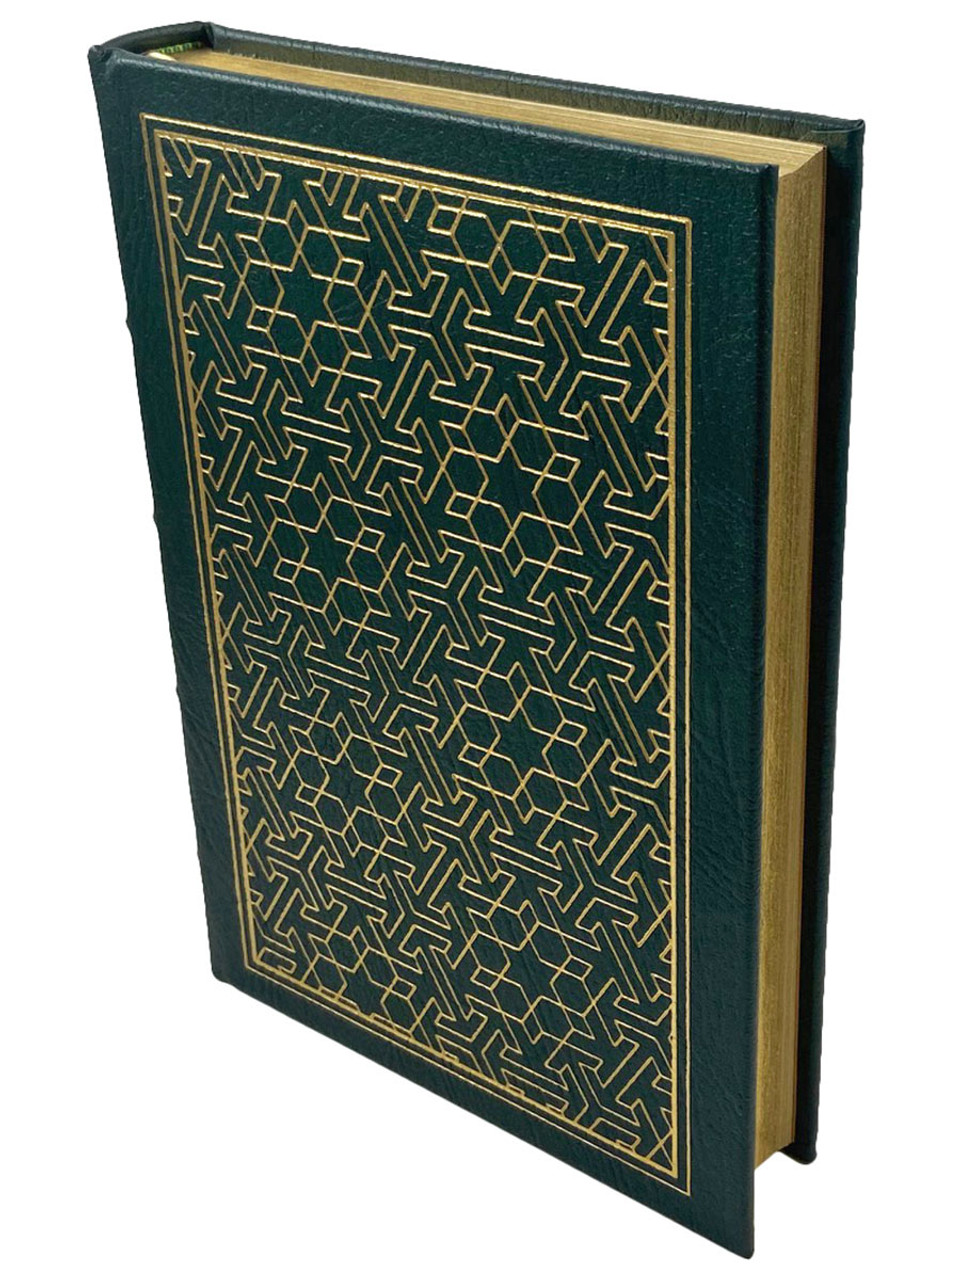 Moshe Arens "Broken Covenant" Signed First Edition, Leather Bound Collector's Edition [Sealed]